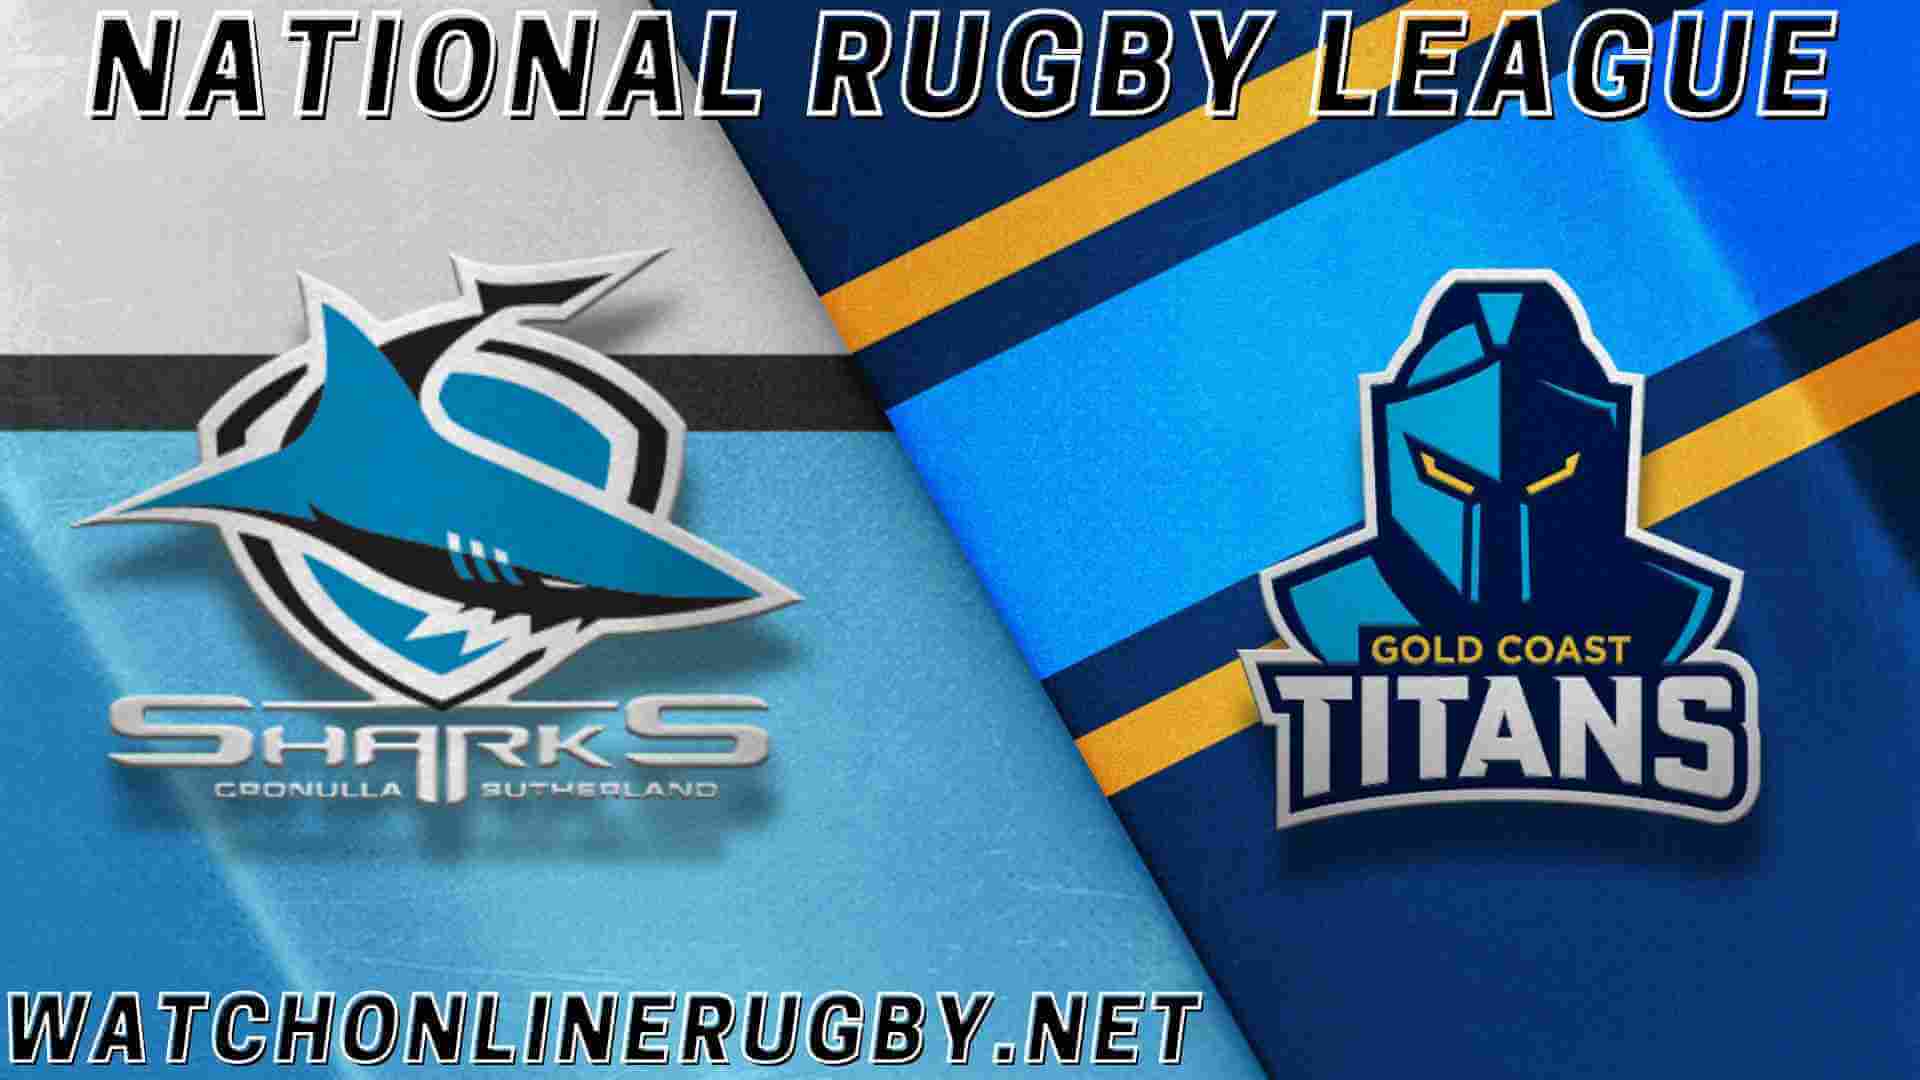 Gold Coast Titans Vs Sharks Rugby Live